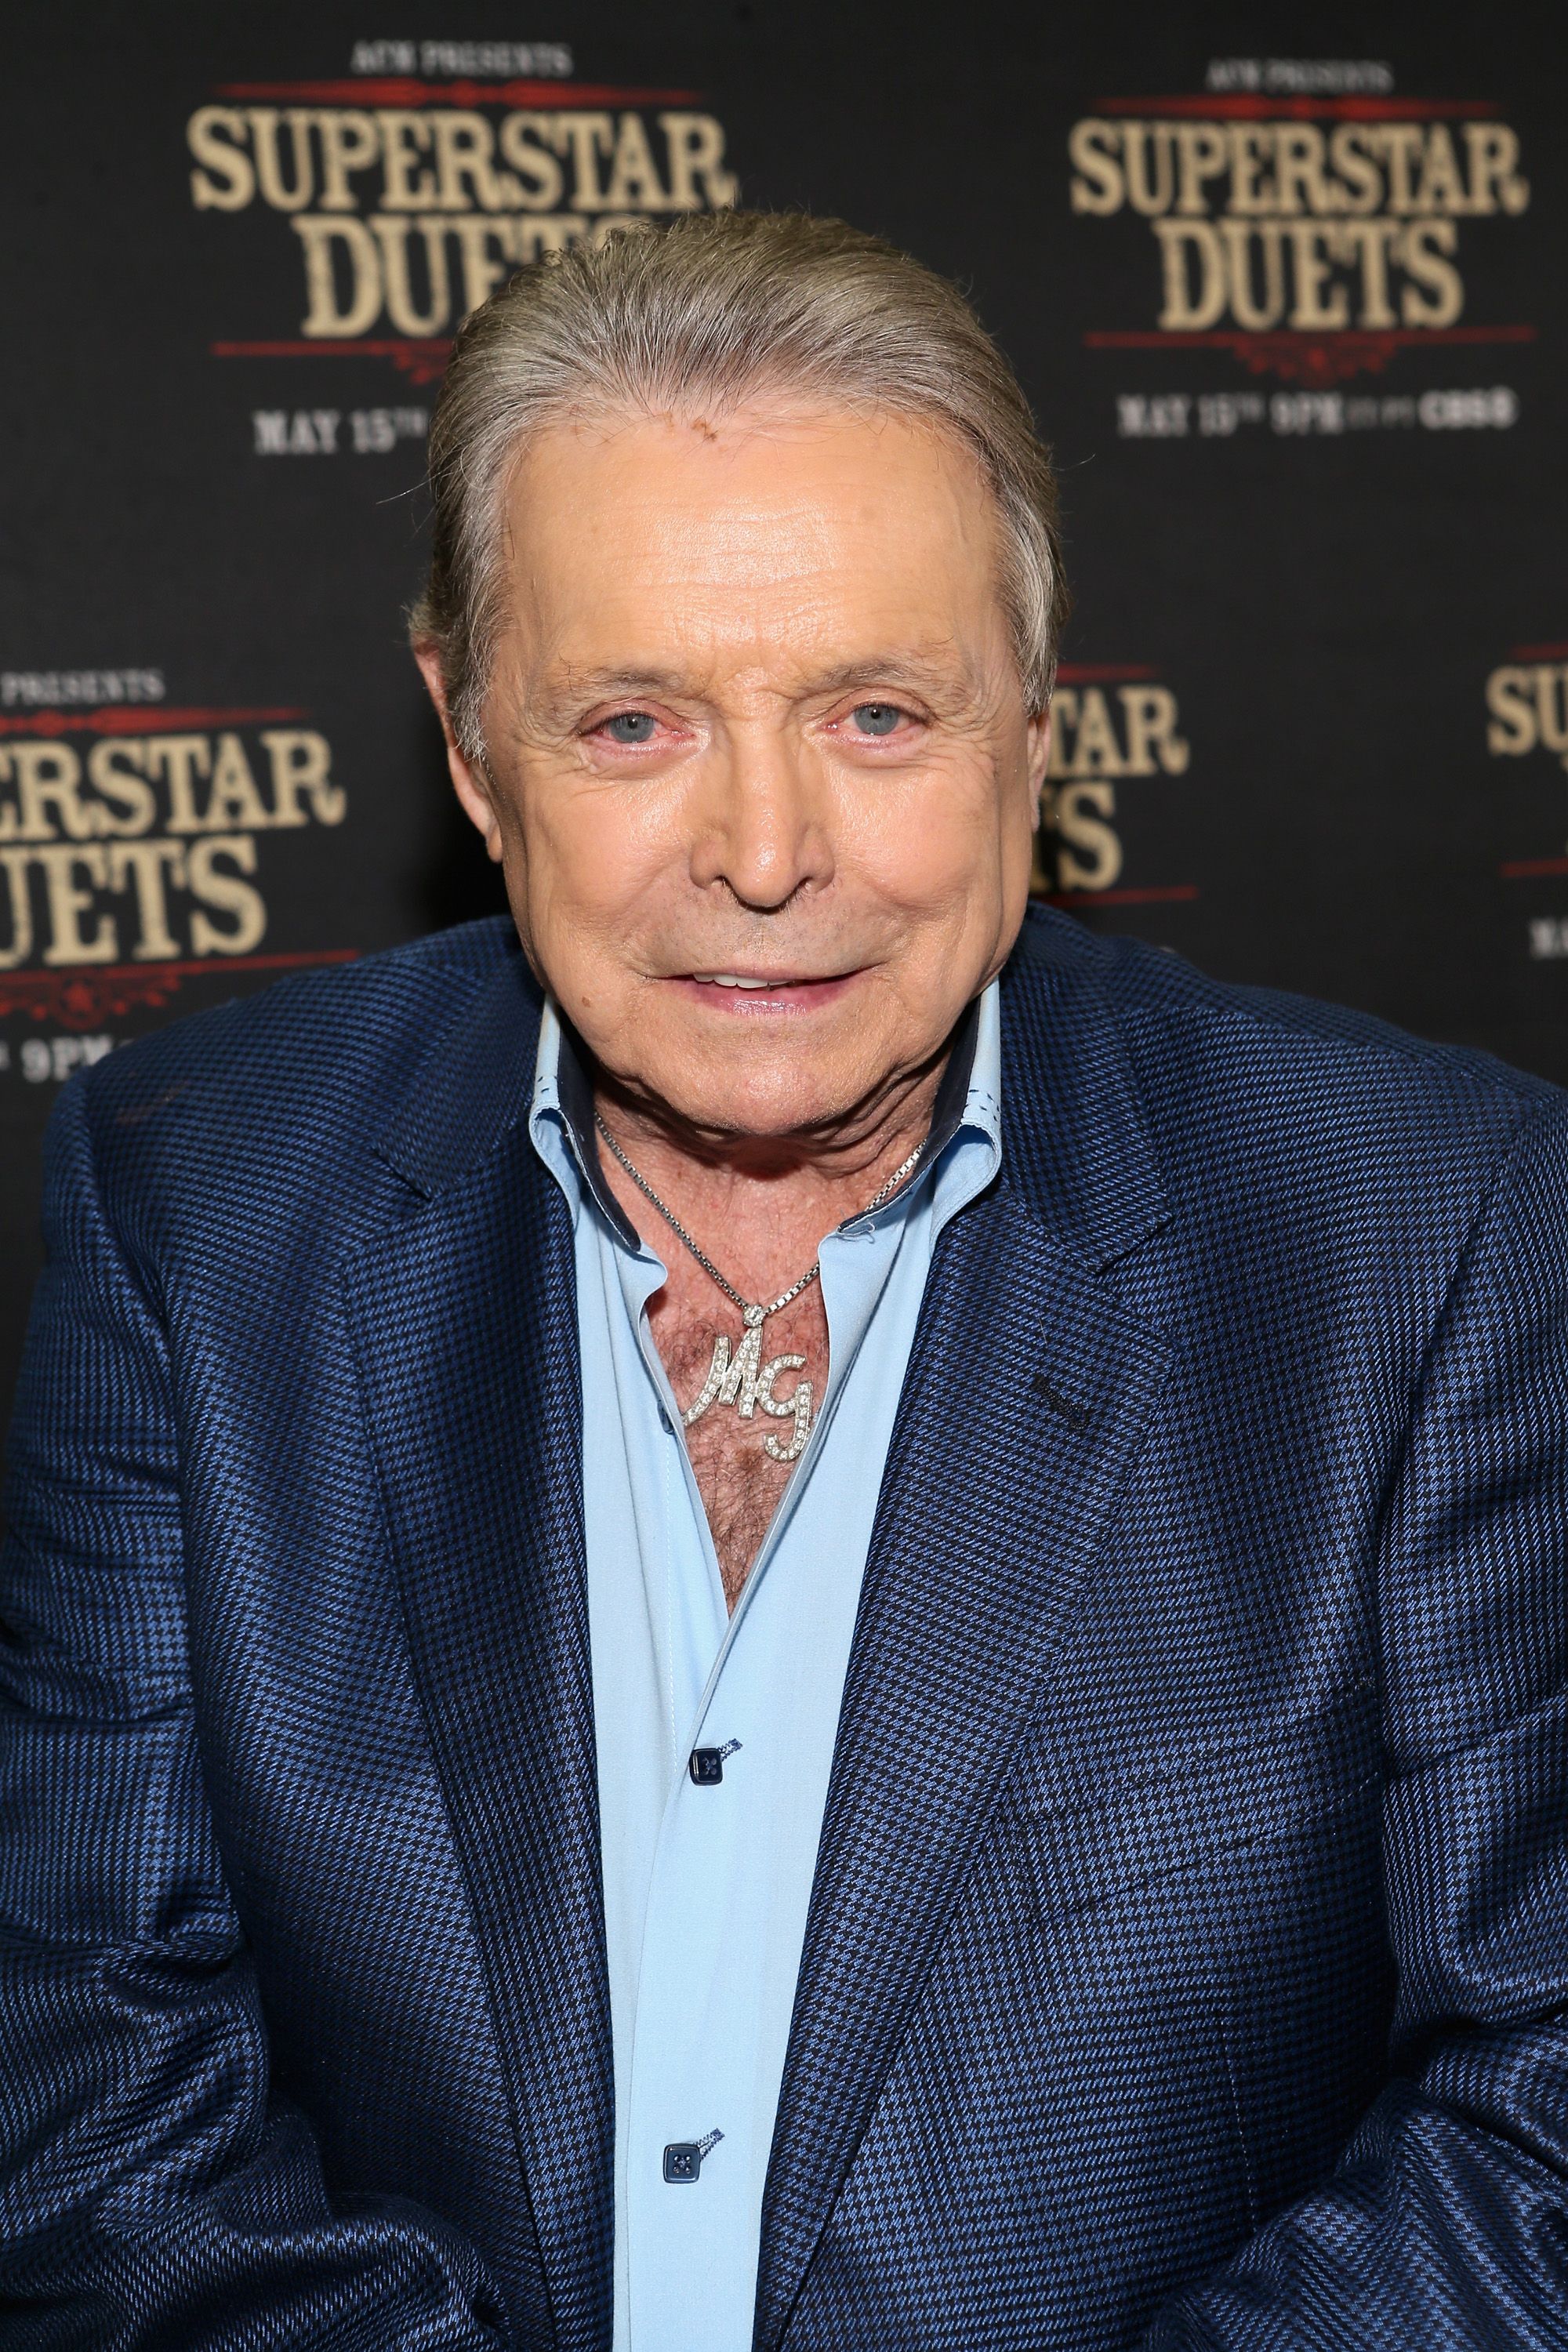 Mickey Gilley during the ACM Presents: Superstar Duets at Globe Life Park in Arlington on April 17, 2015, in Arlington, Texas. | Source: Getty Images